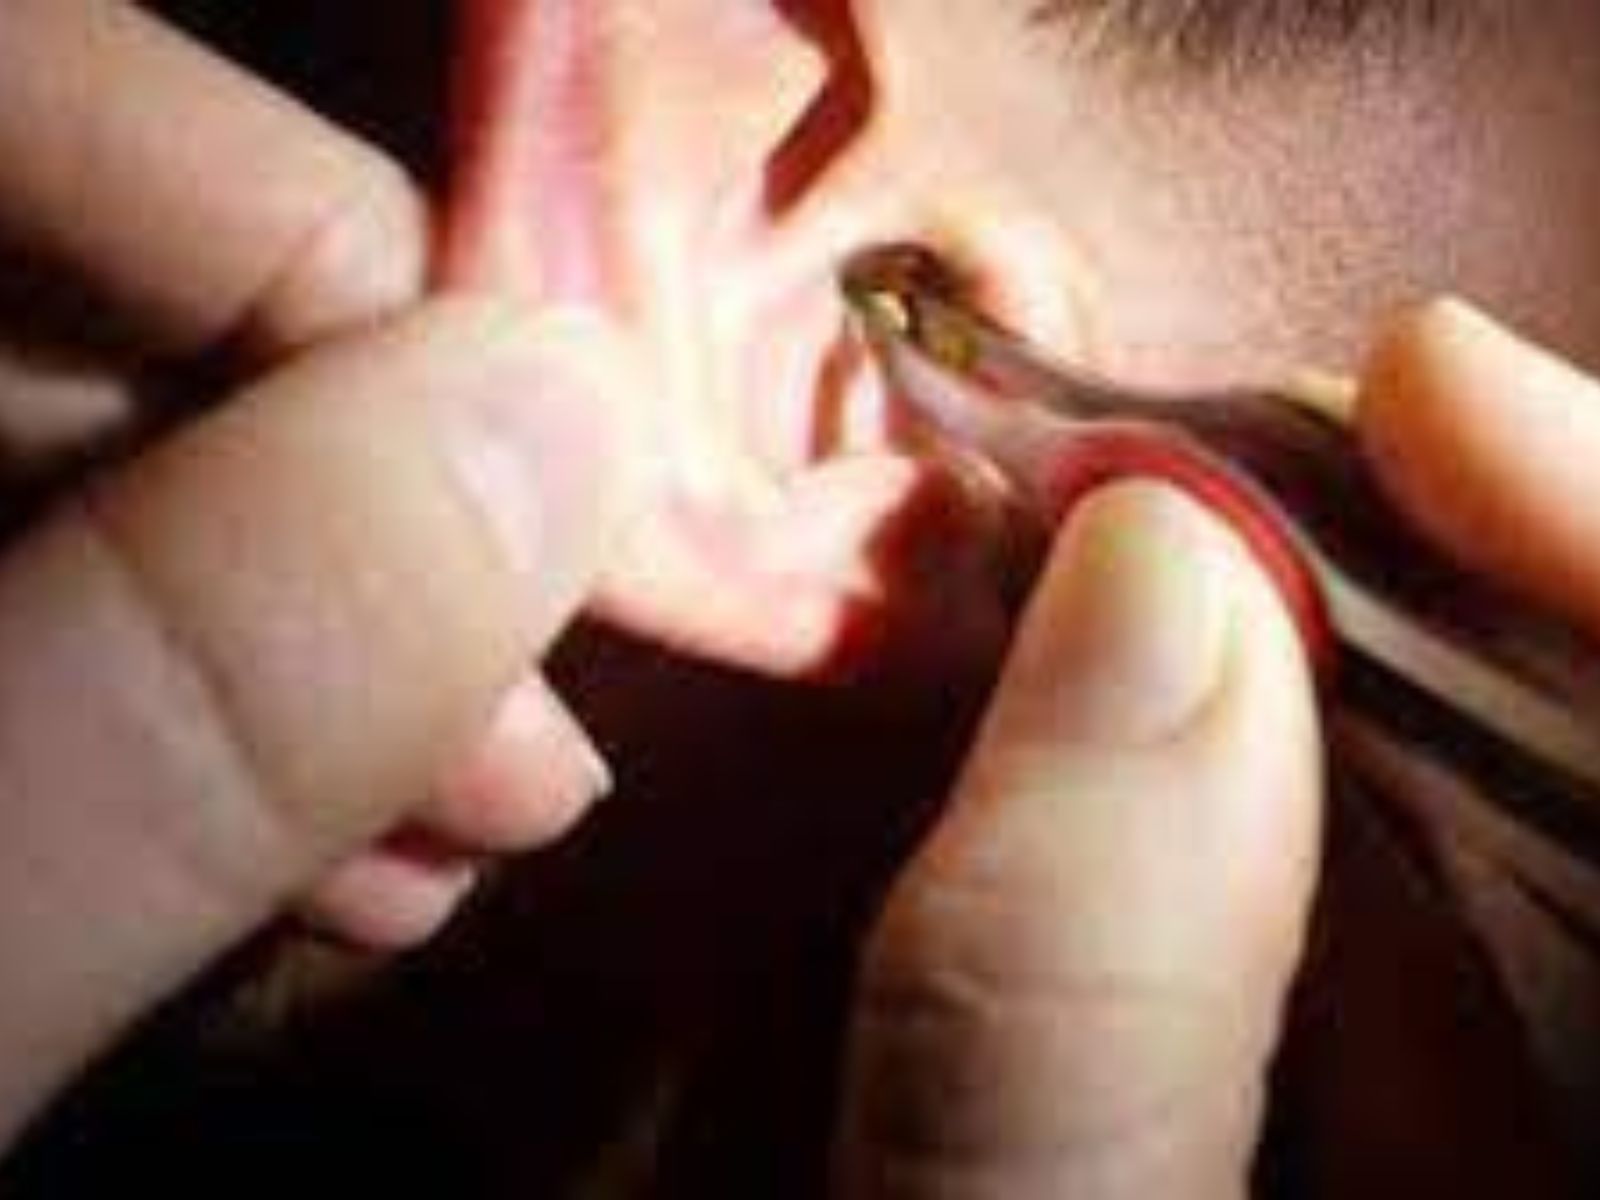 Manual Ear Wax removal for patient from Lenton